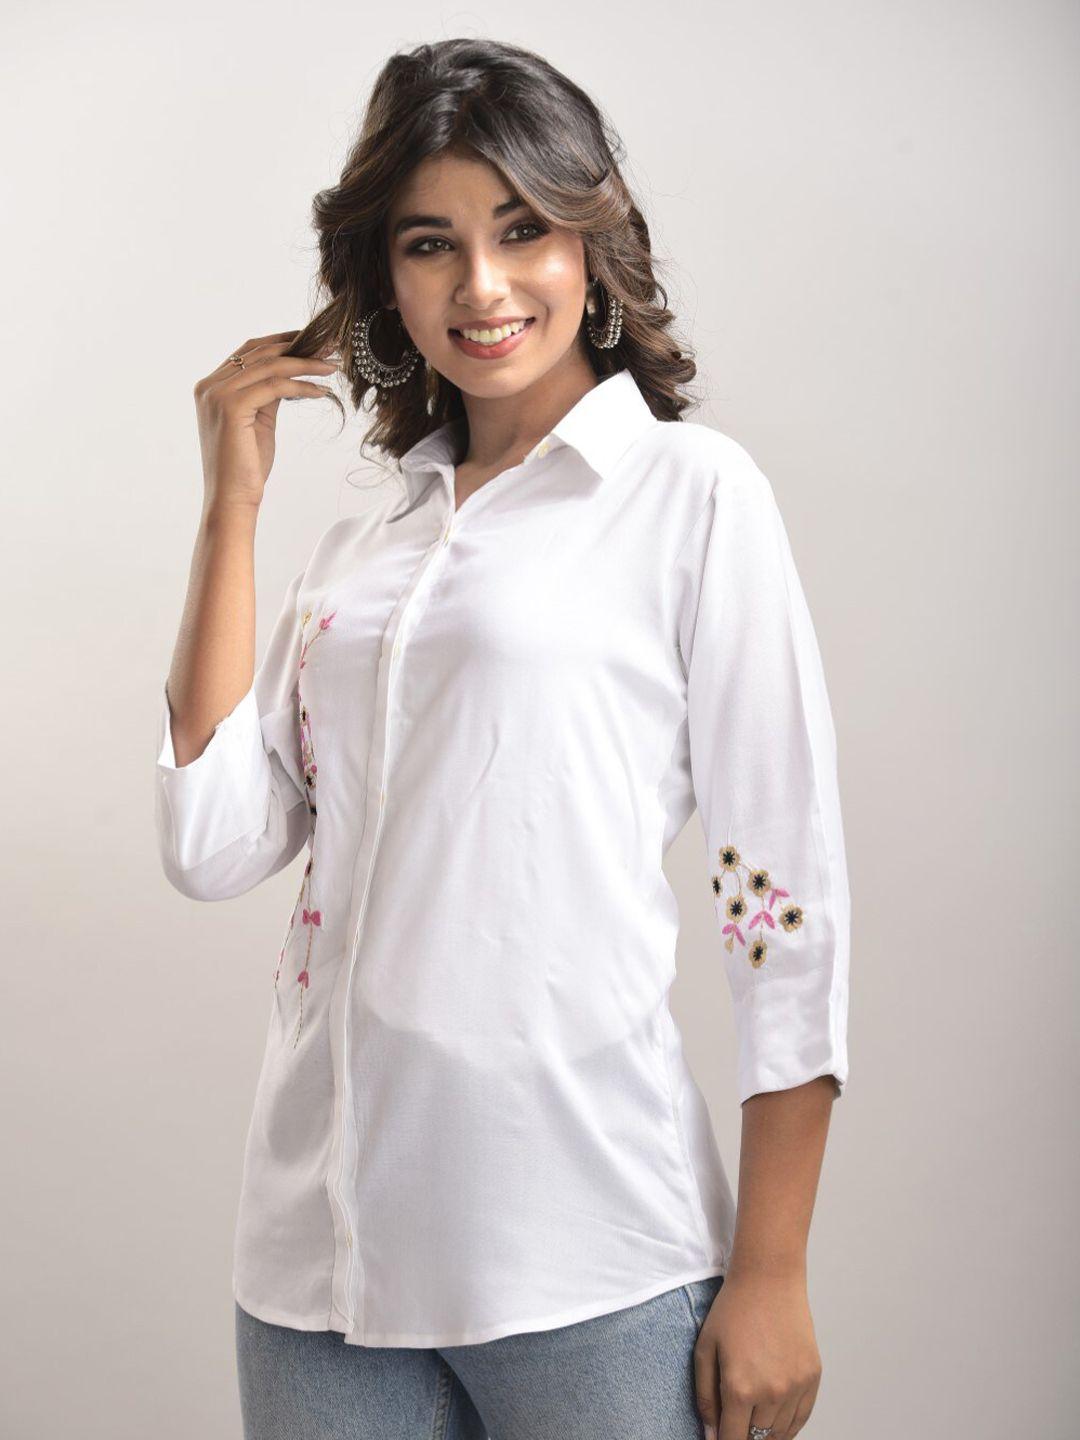 senyora white floral embroidered shirt style top